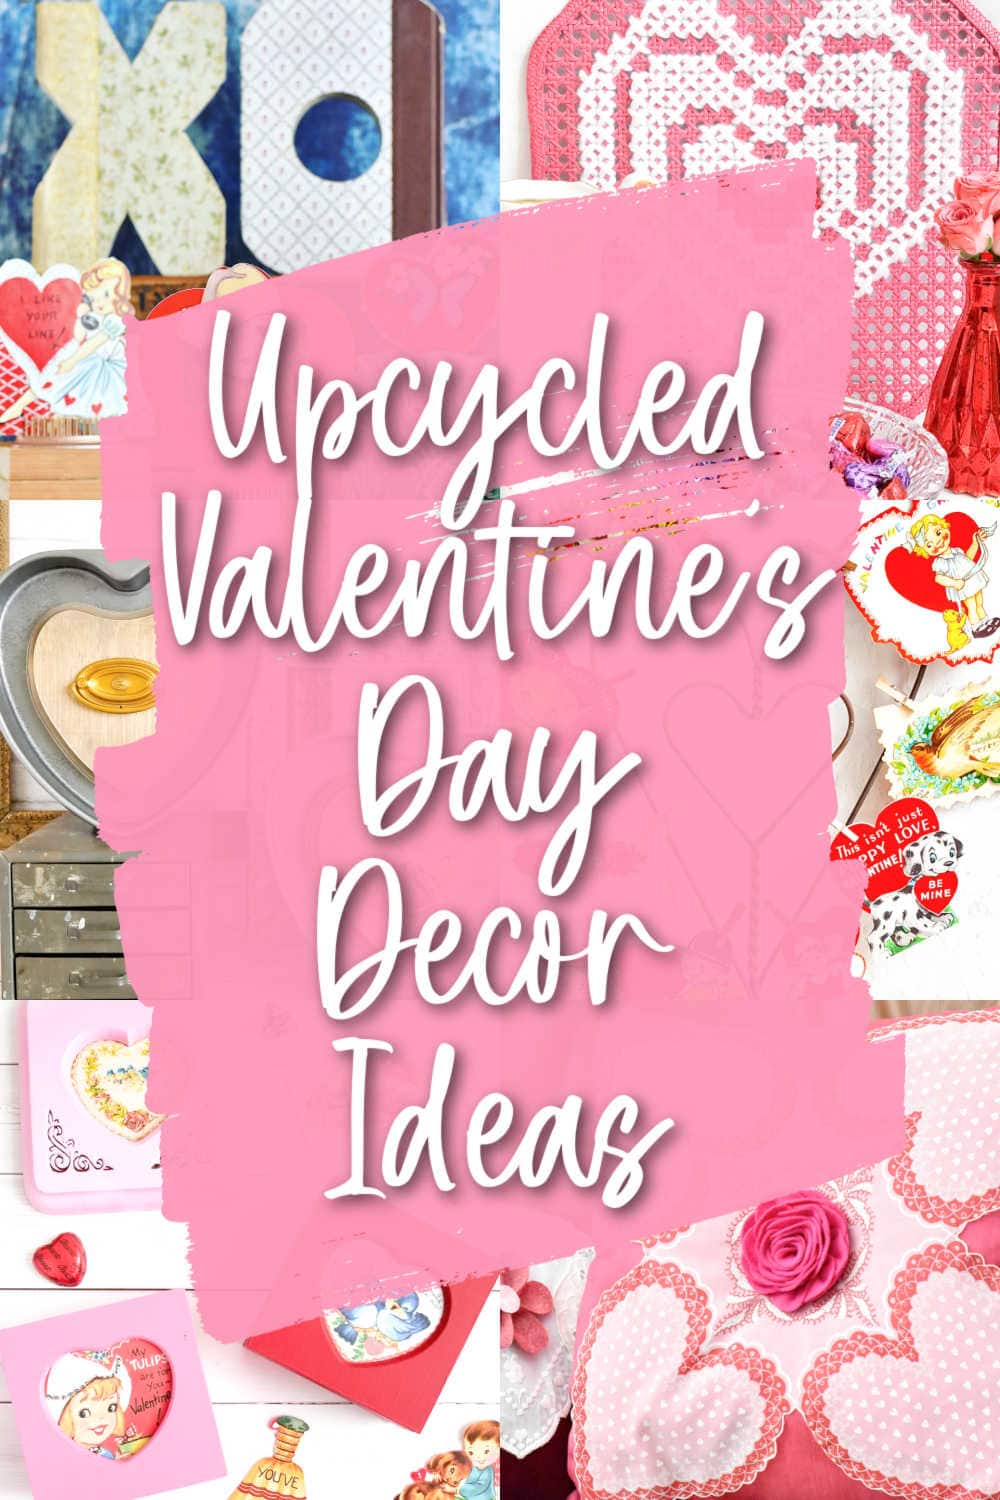 upcycle projects as valentine's day decorations